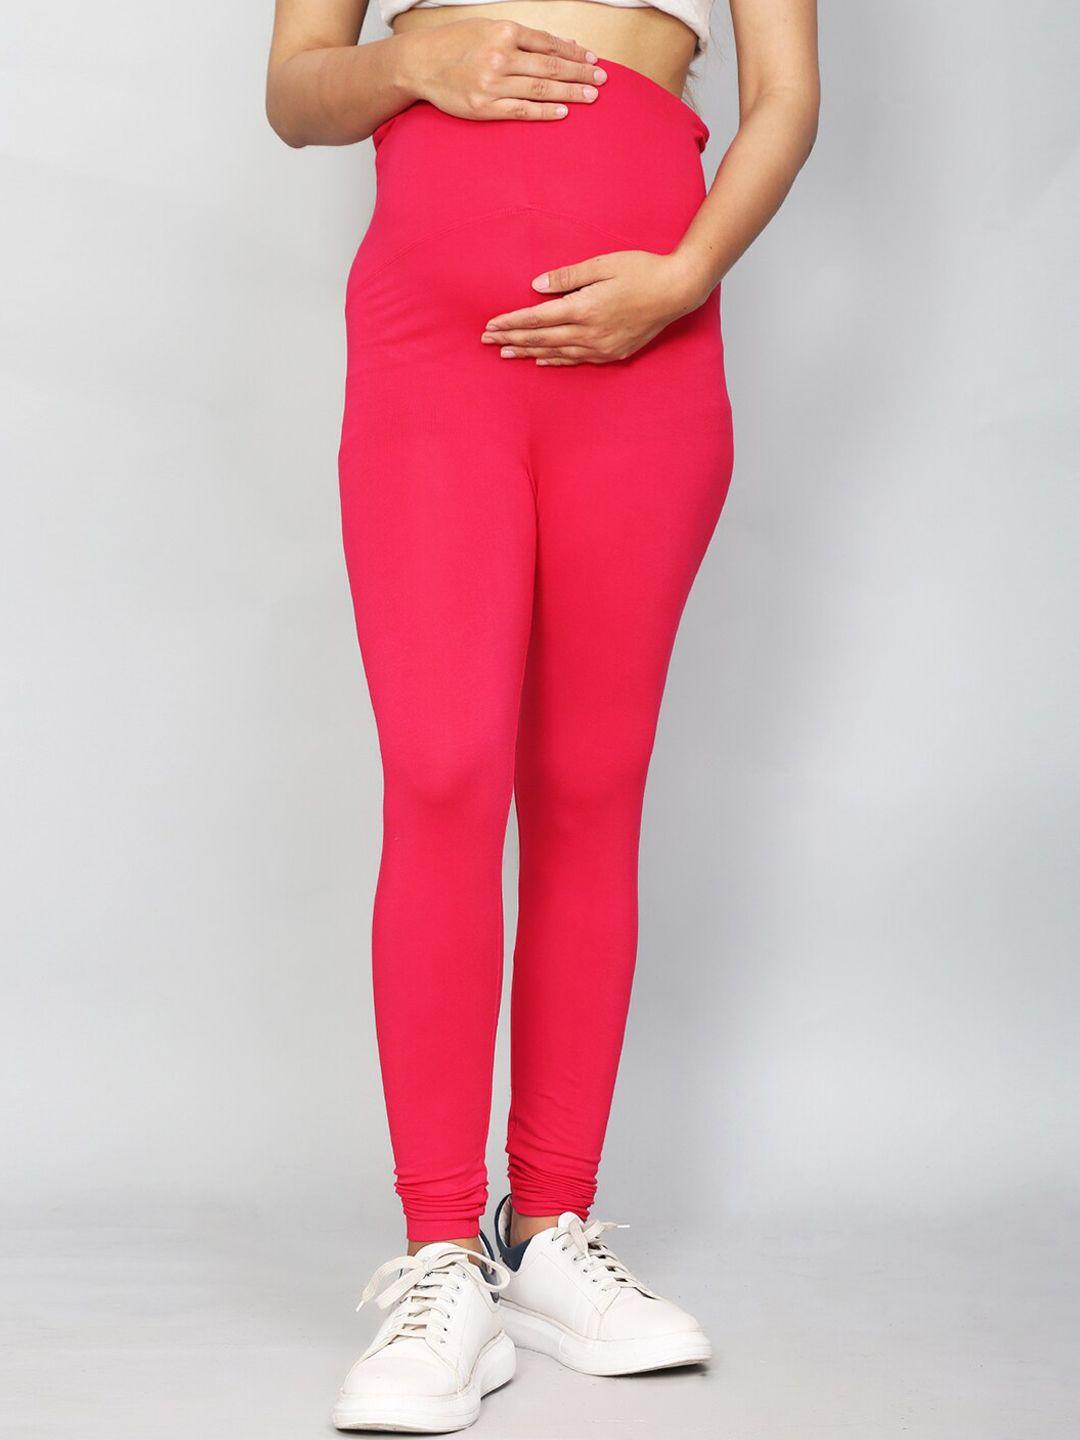 sillyboom women pink solid maternity stretchable churidar leggings